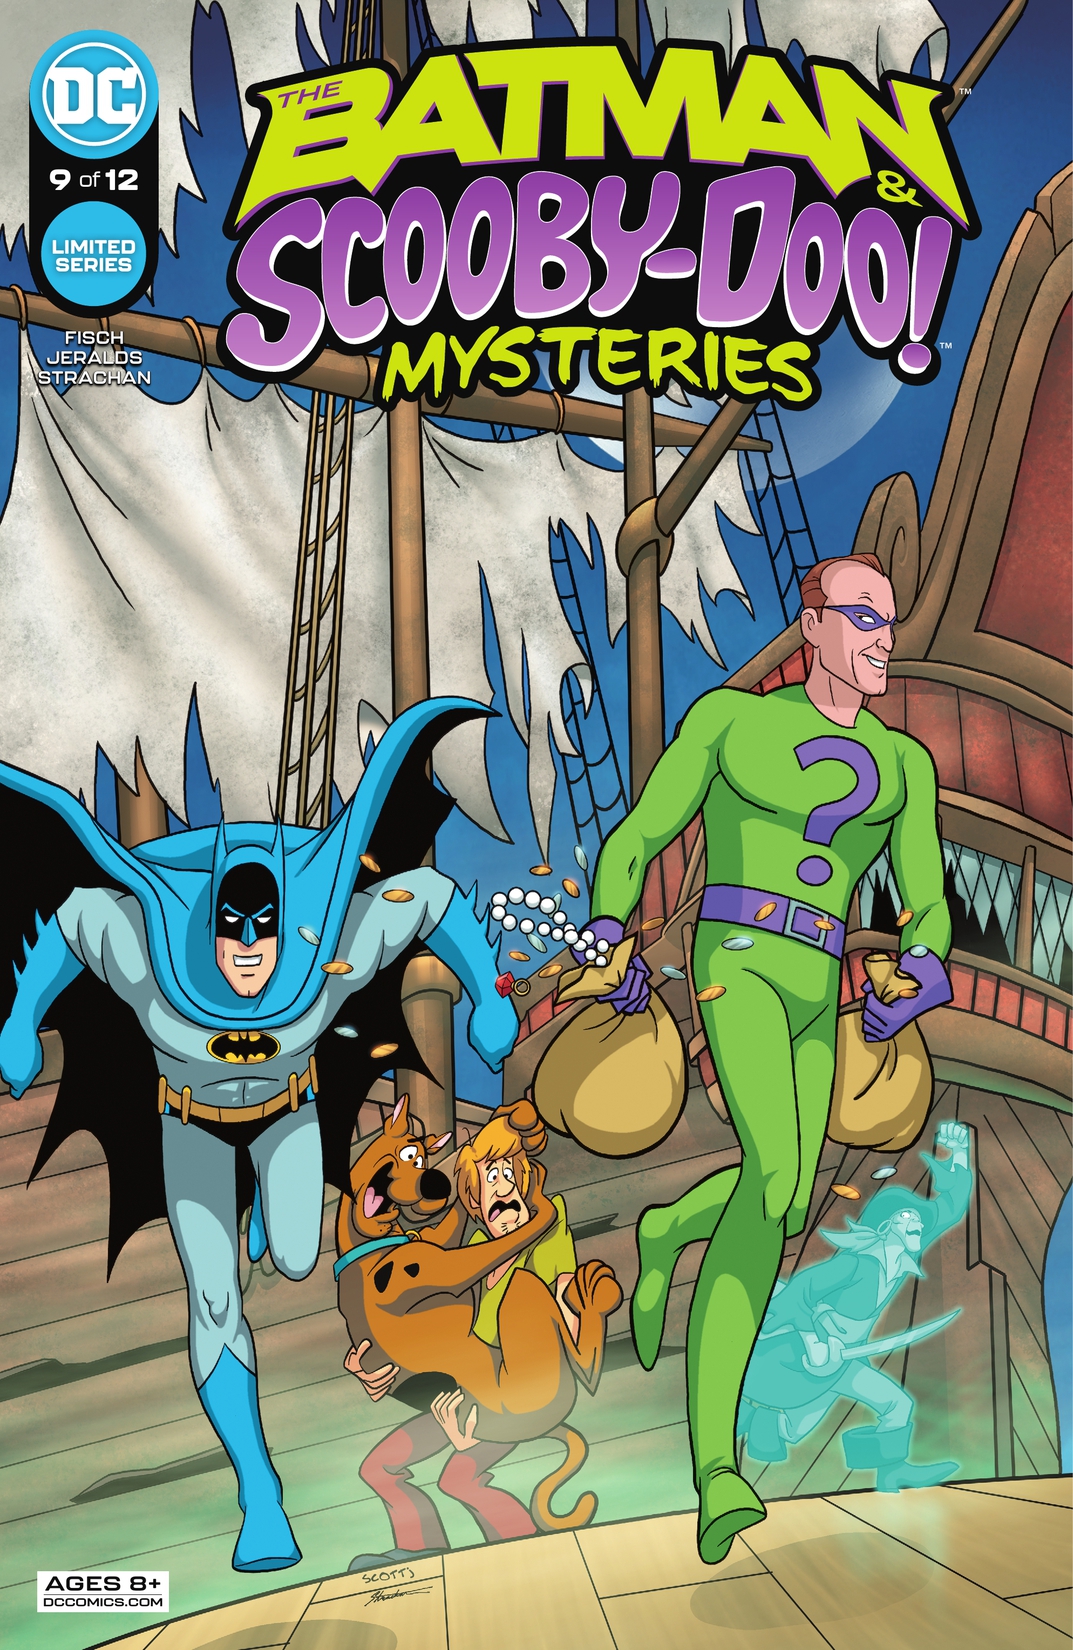 The Batman & Scooby-Doo Mysteries #9 preview images